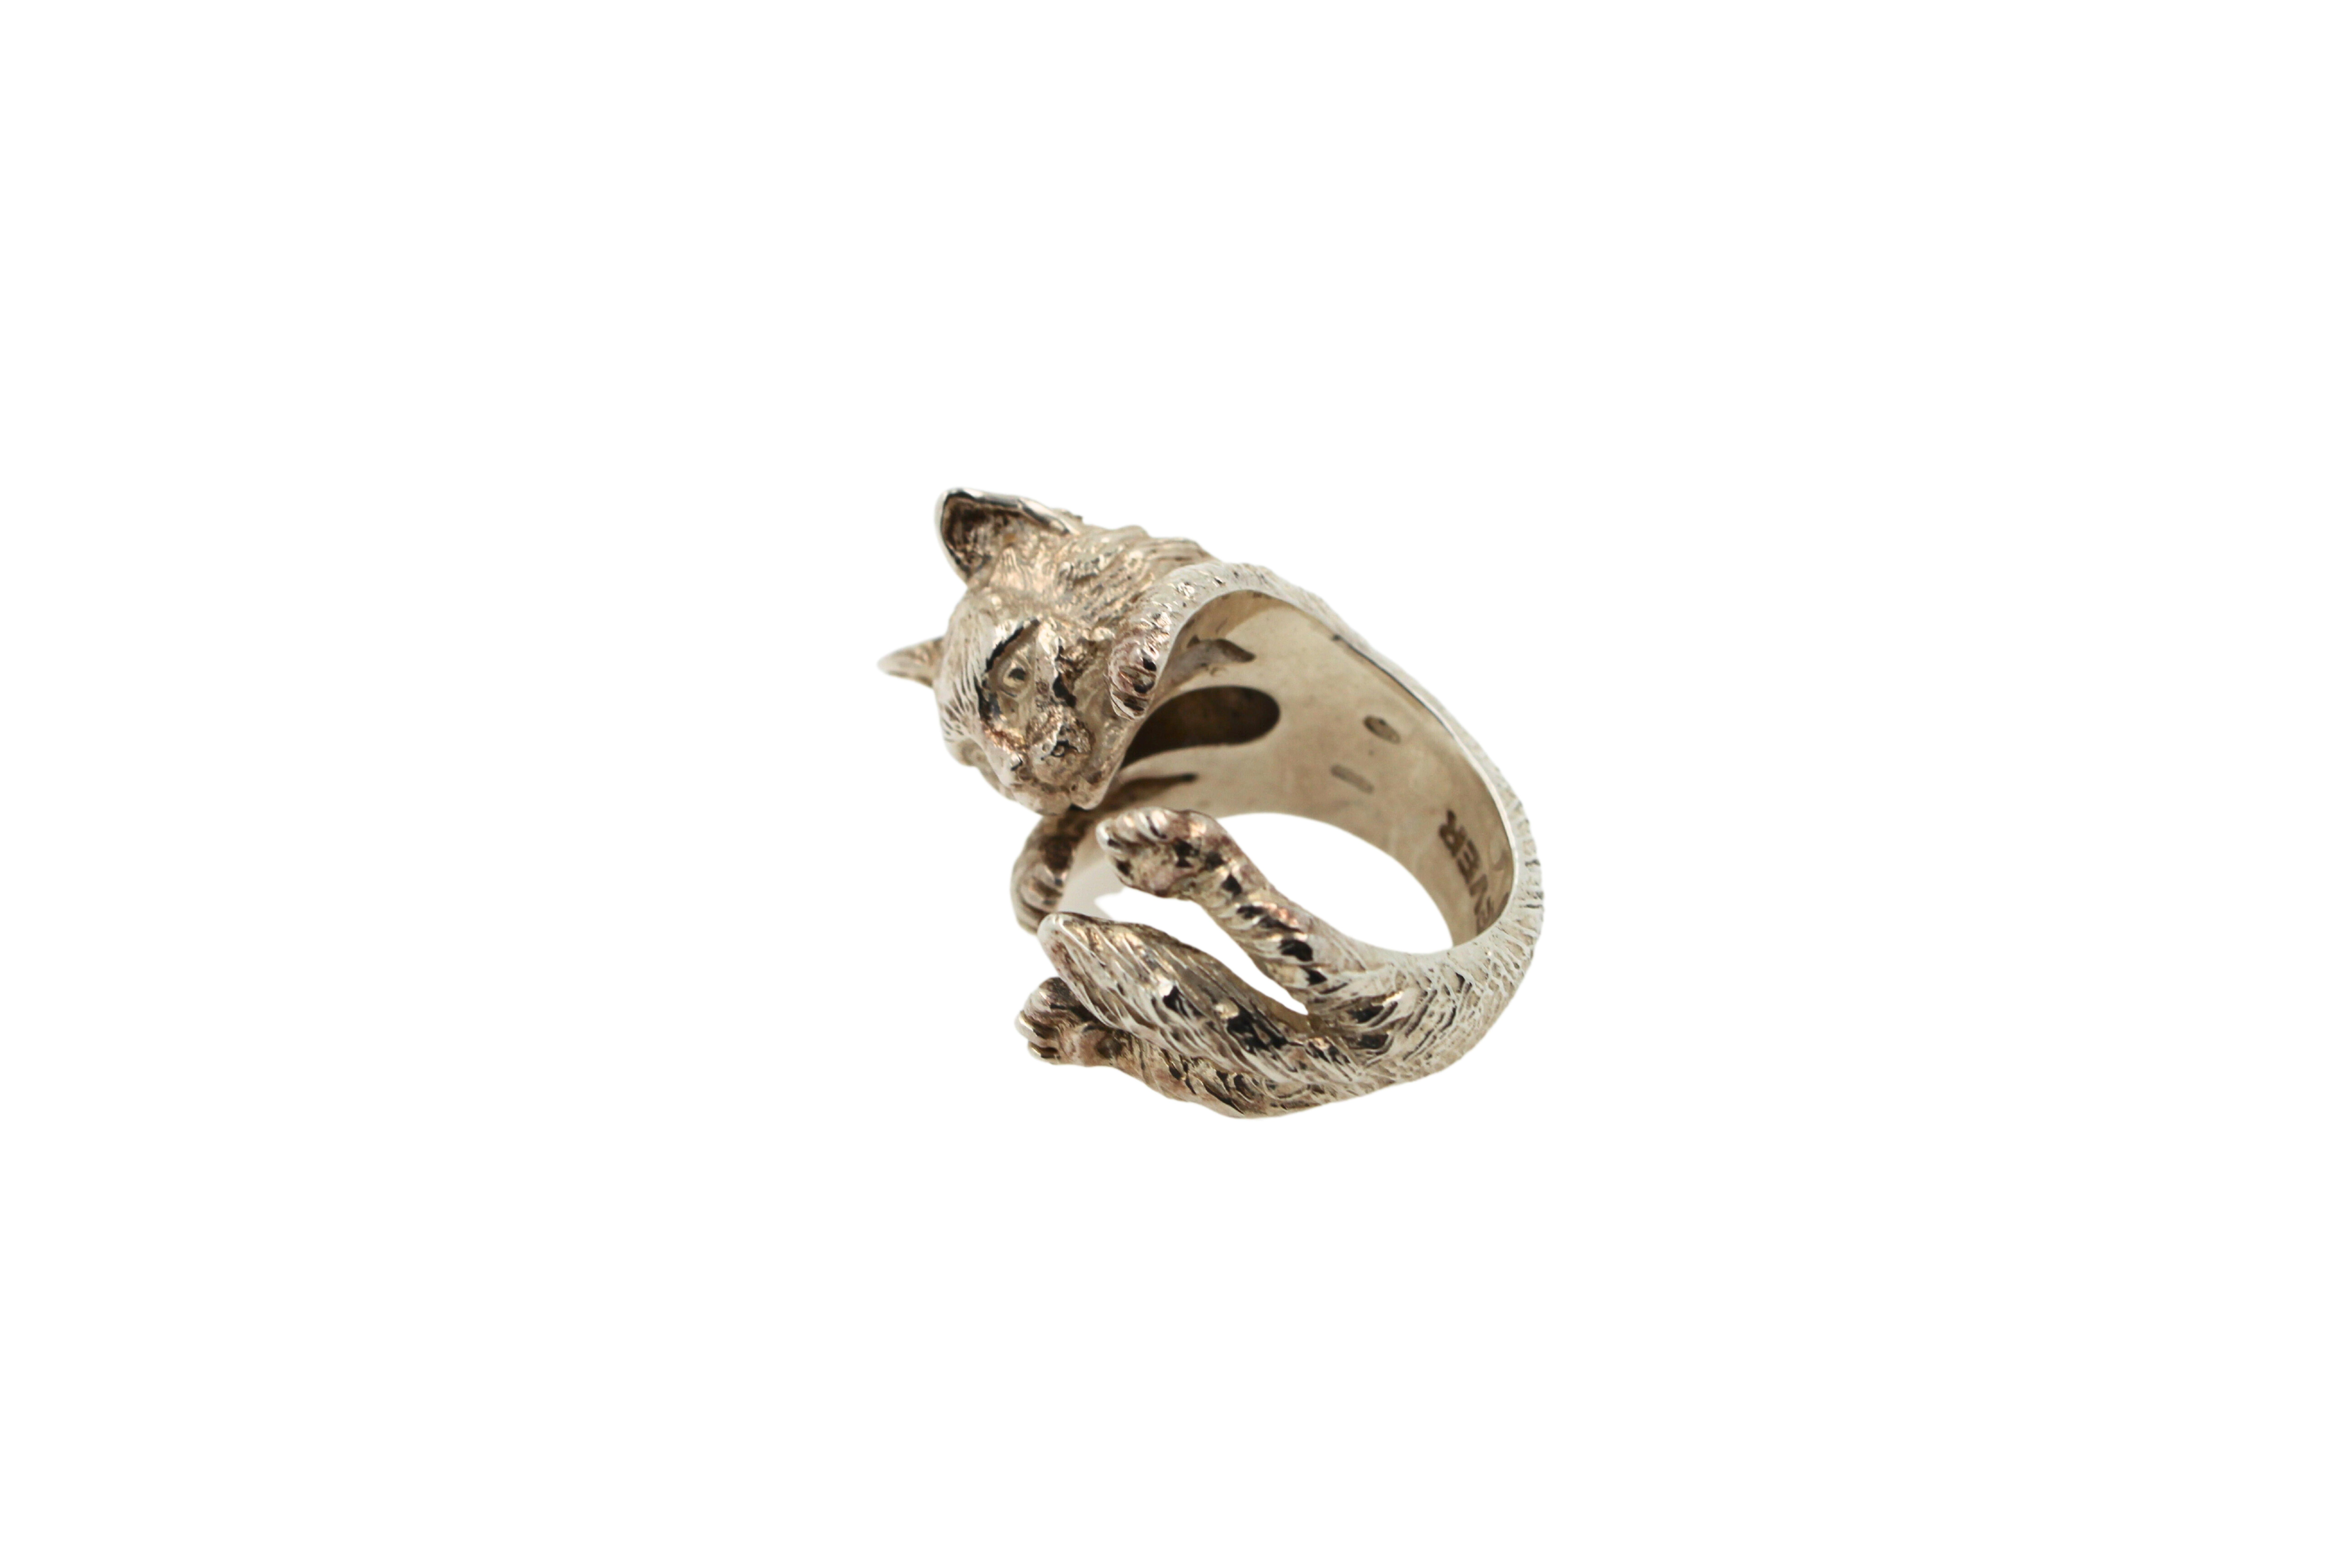 925 Sterling Silver Norwegian Forest Statement Open Hug Ring
-Cute, fun and versatile
-925 Sterling Silver 
-Entirely designed and handcrafted in Italy
-Silver is slightly tarnished due to natural reaction over time creating a more vintage look. It